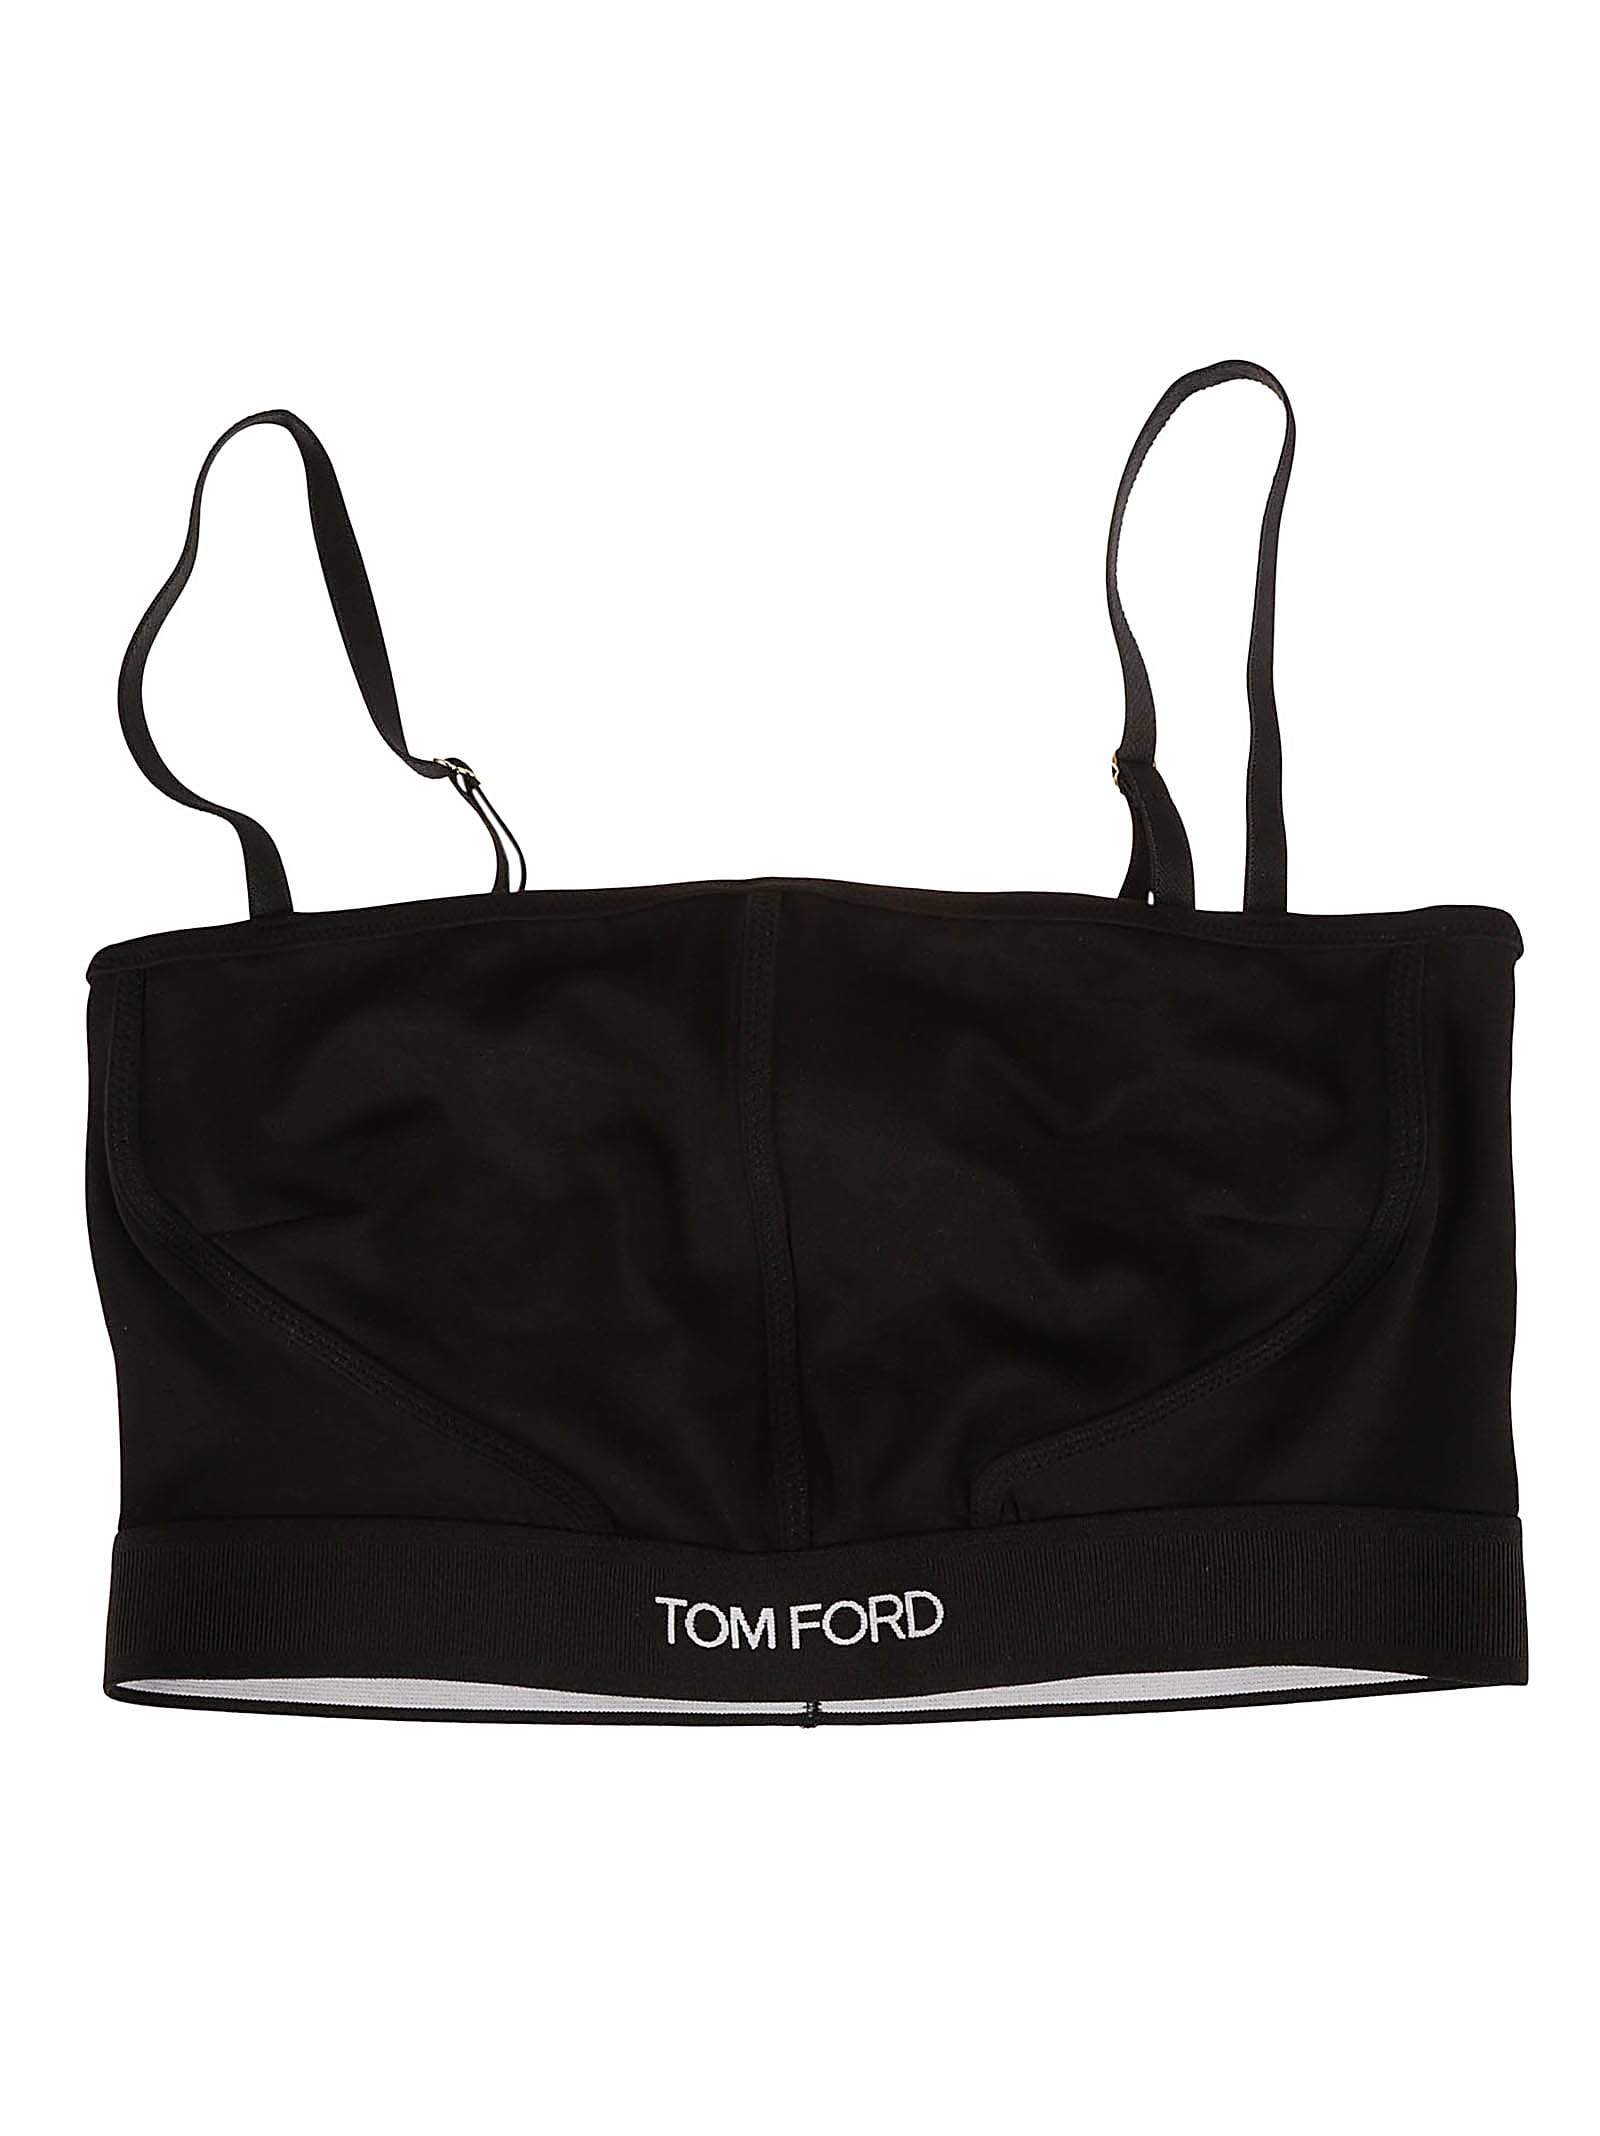 TOM FORD LOGO FRONT TOP